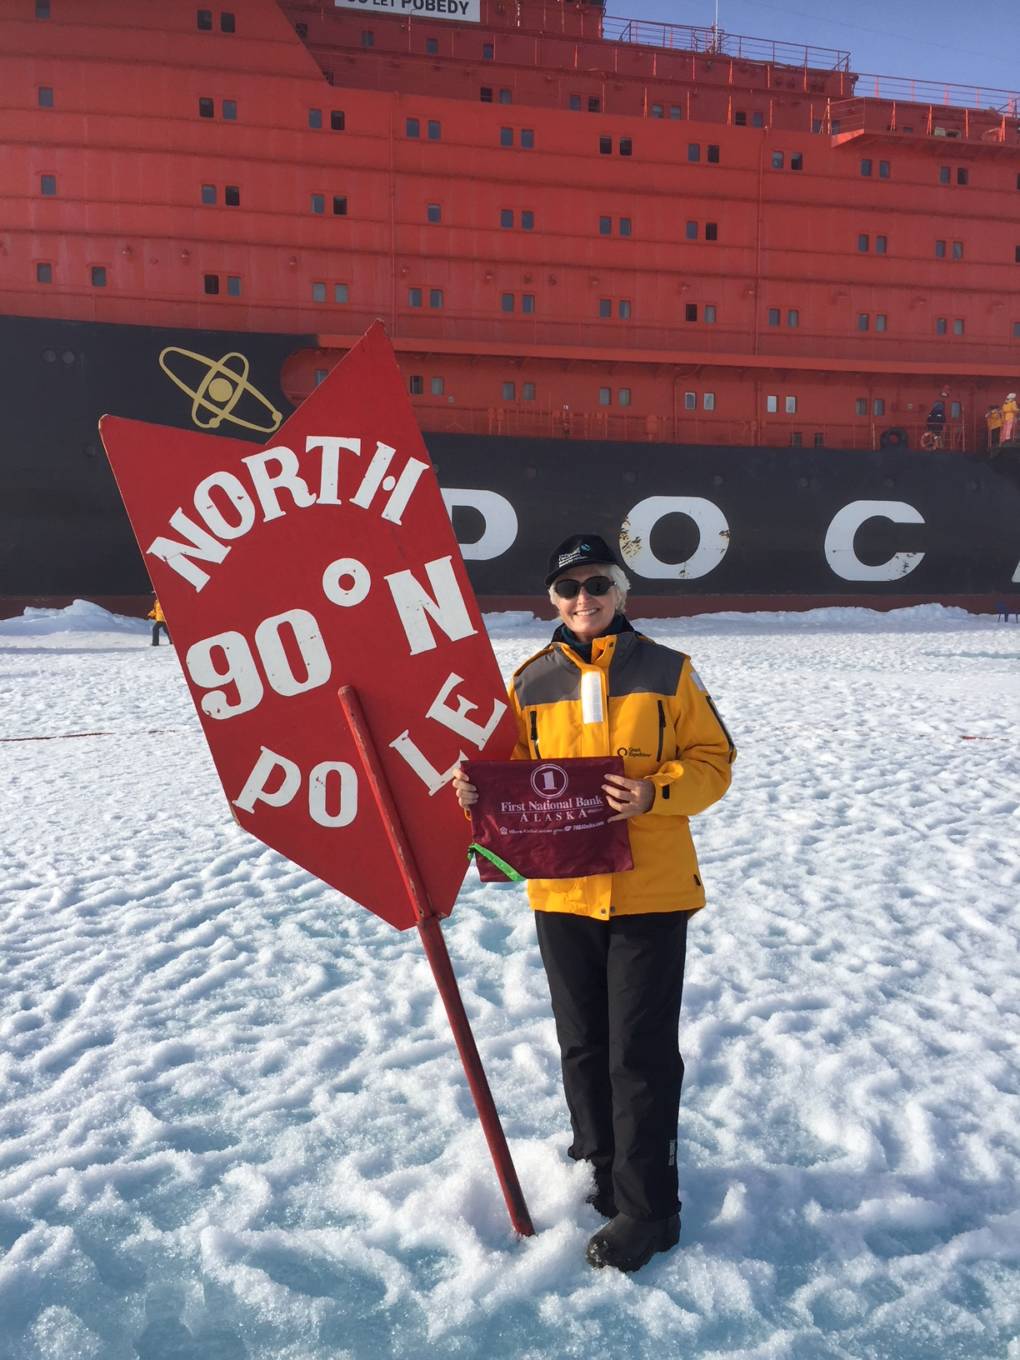 A woman stands next to a sign reading 'North Pole'.